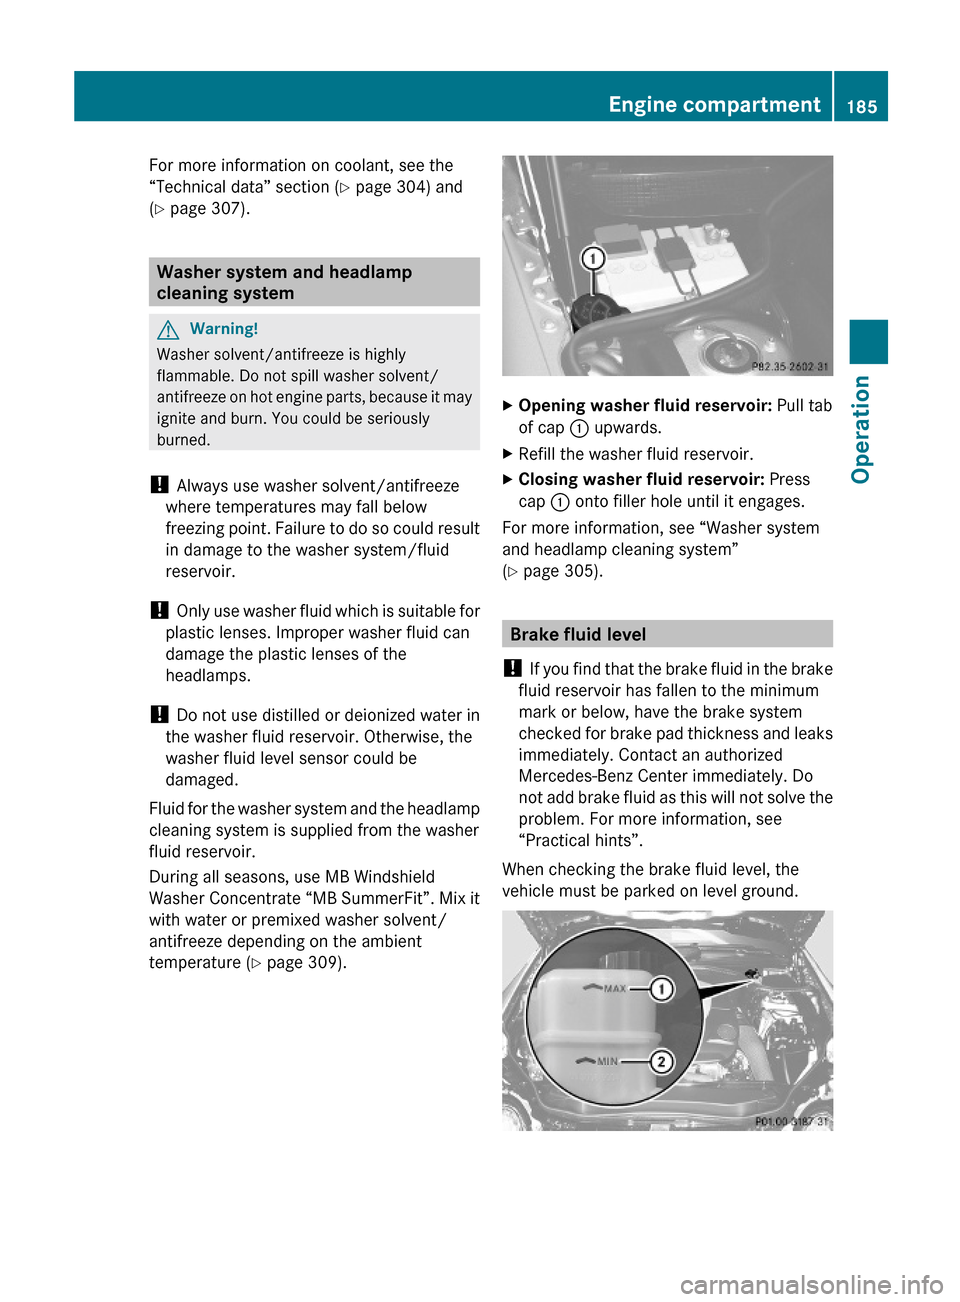 MERCEDES-BENZ SL550 2012 R230 Owners Manual For more information on coolant, see the
“Technical data” section (Y page 304) and
(Y page 307).
Washer system and headlamp 
cleaning system
GWarning!
Washer solvent/antifreeze is highly
flammable